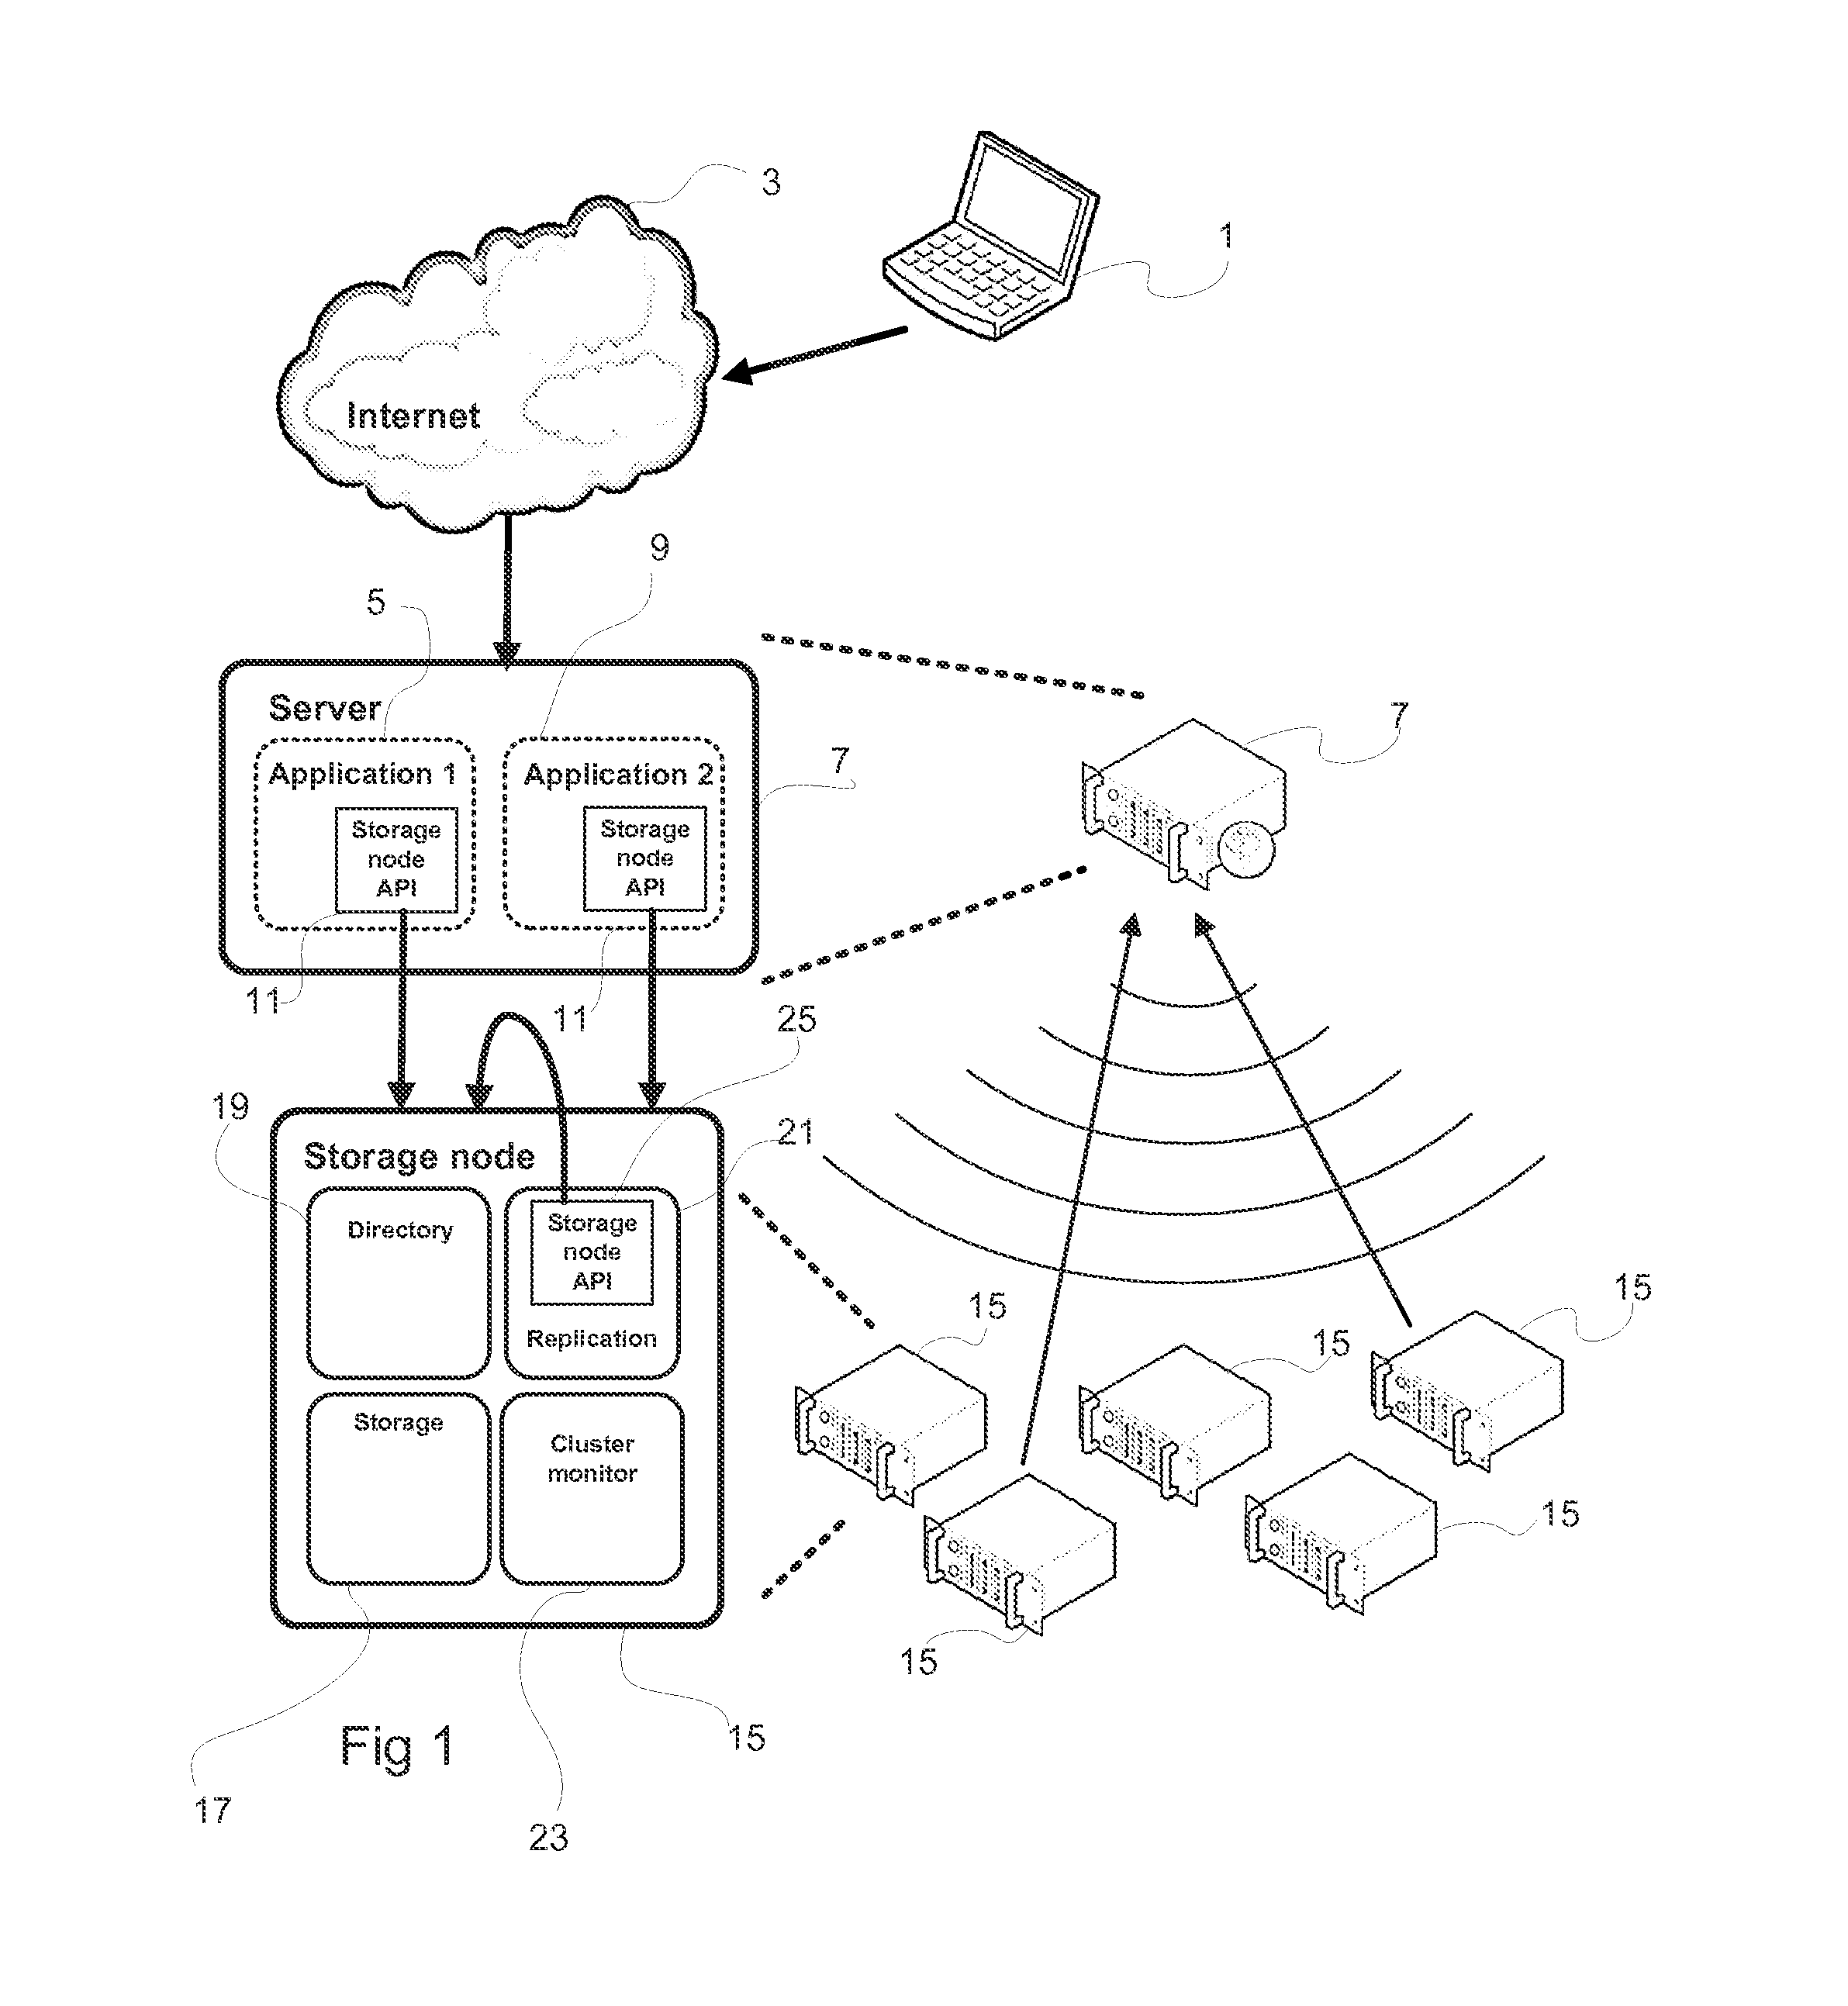 Method And Device For Writing Data To A Data Storage System Comprising A Plurality Of Data Storage Nodes